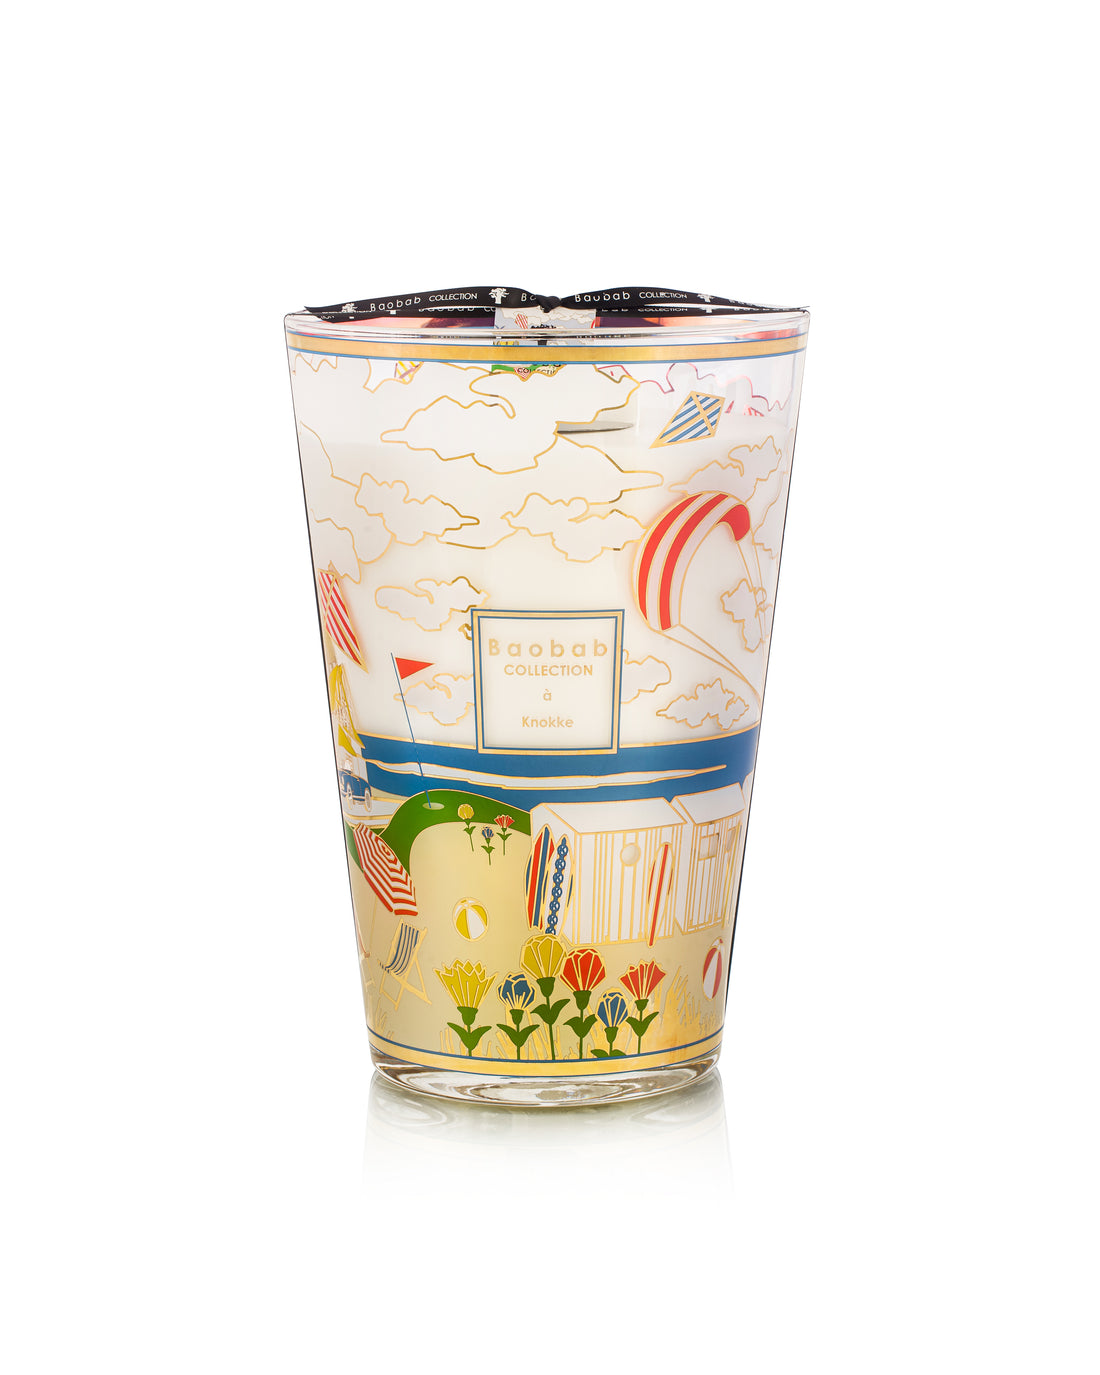 SCENTED CANDLE KNOKKE - BAOBAB COLLECTION